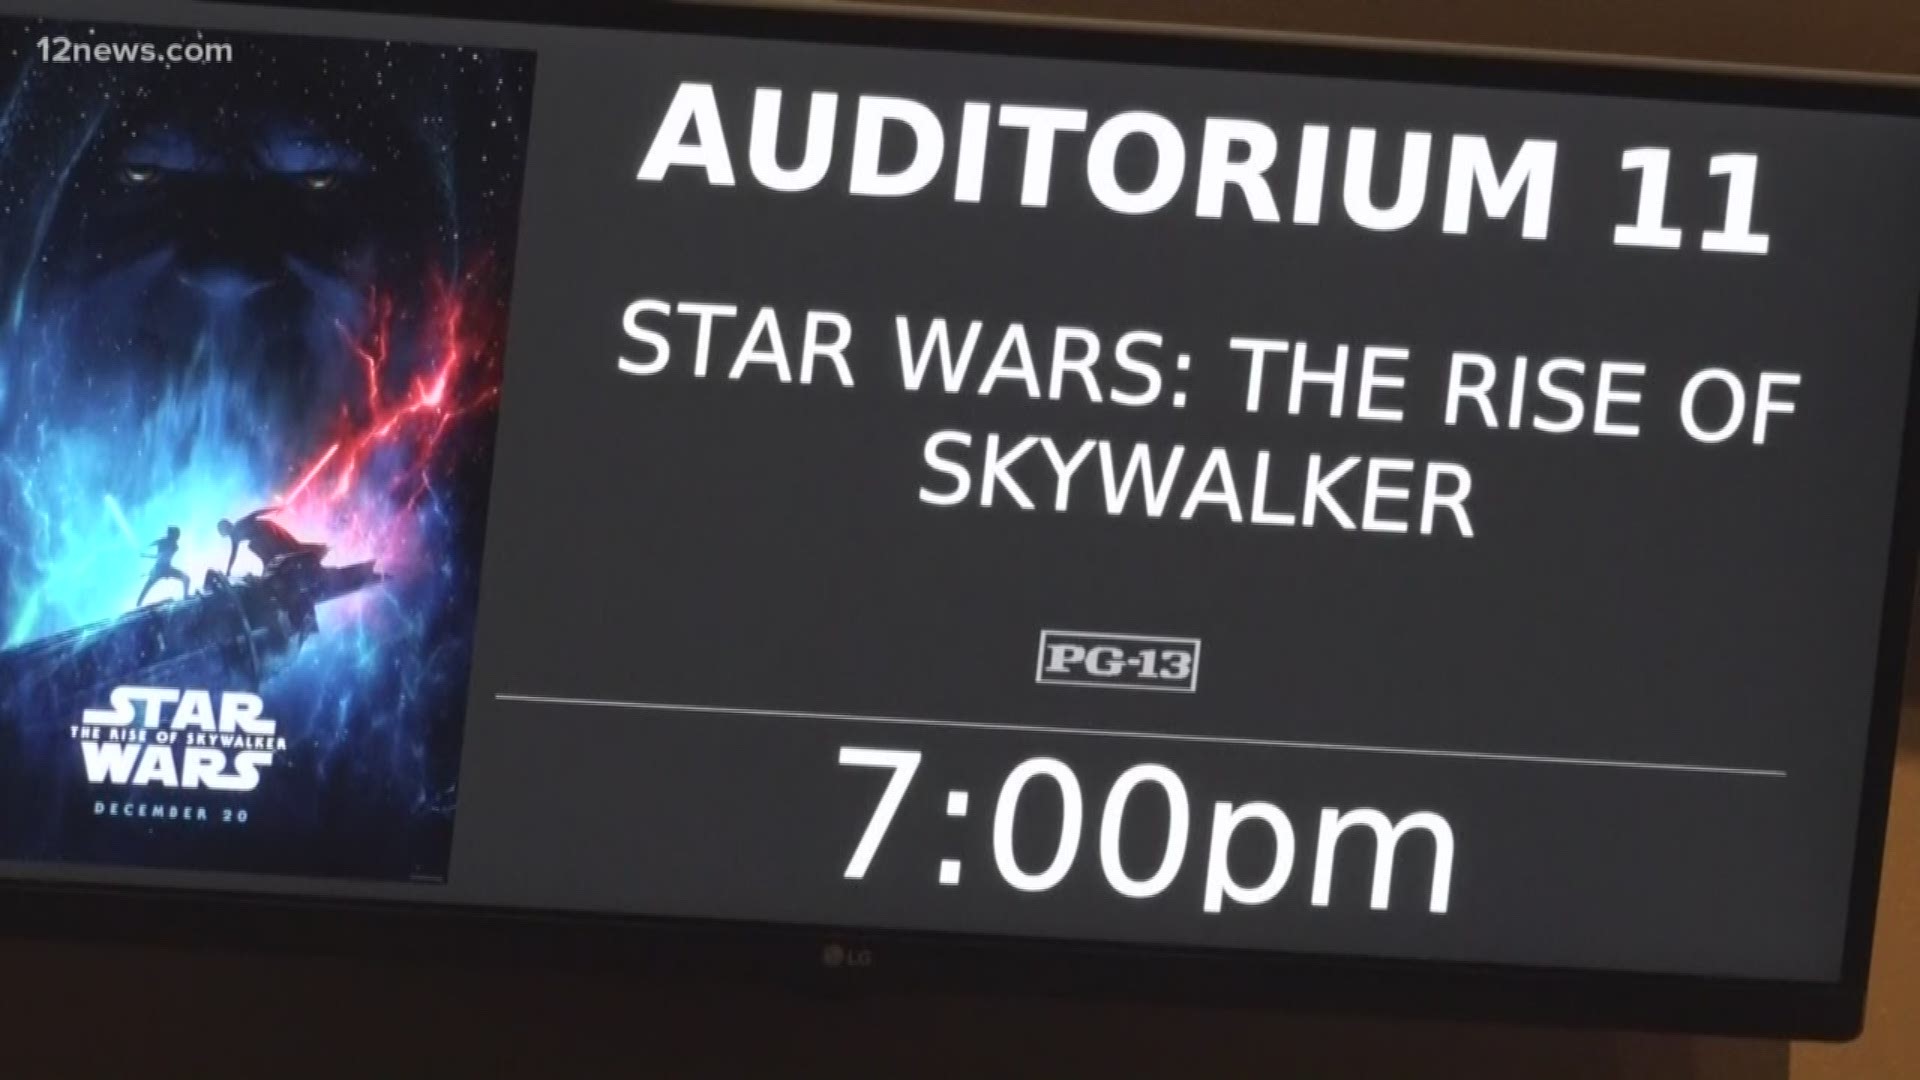 "Star Wars: The Rise of Skywalker" hit theaters today, and people in the Valley aren't holding back their excitement.